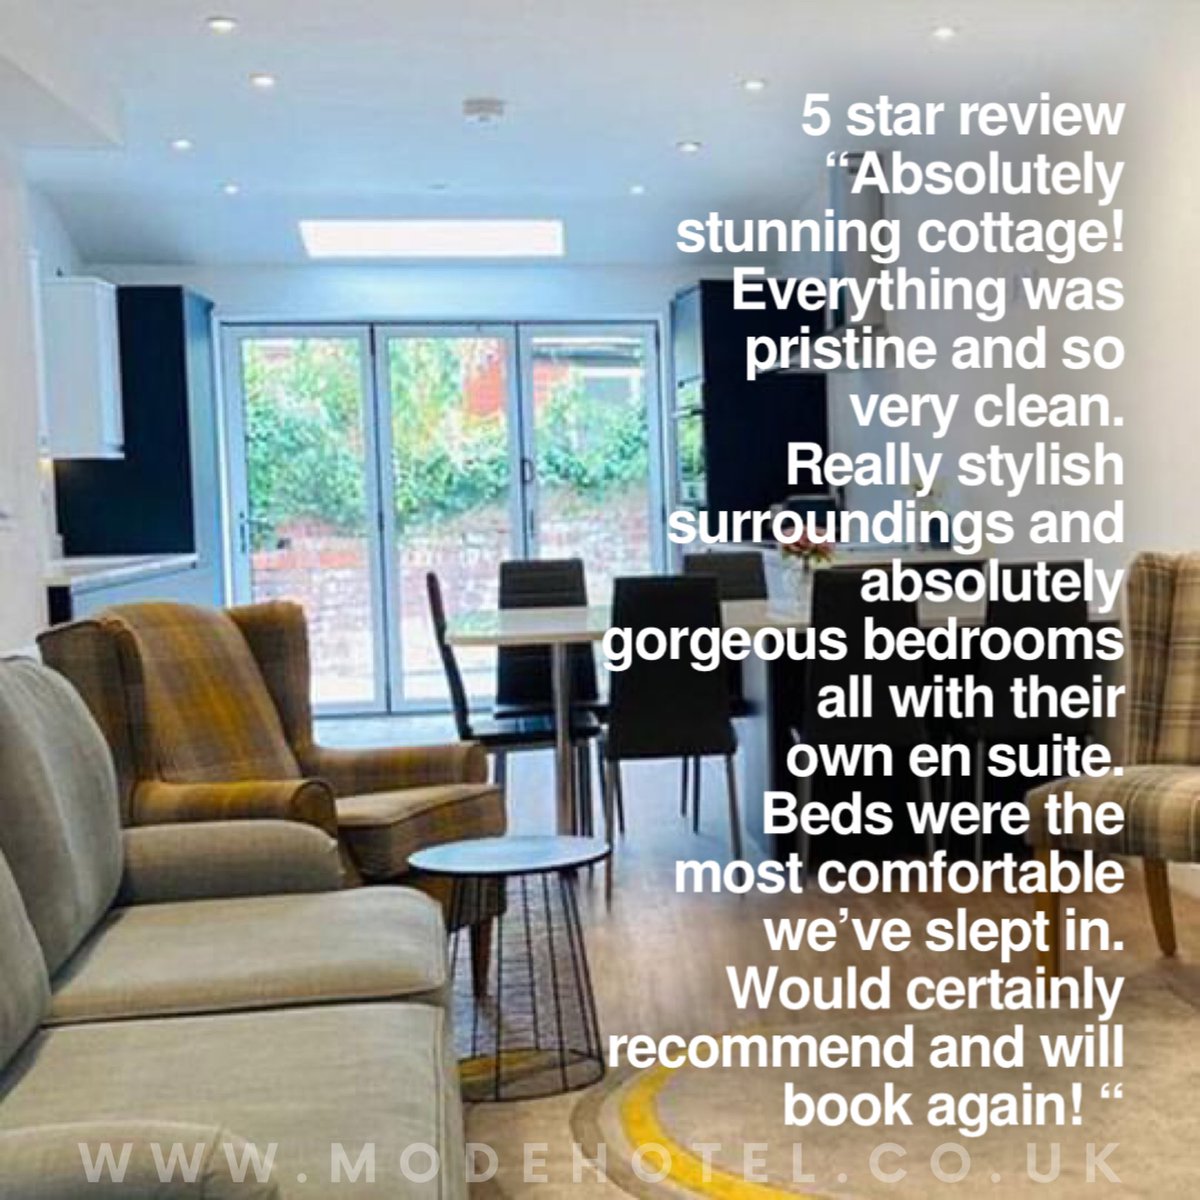 A nice  5 star review that we received today from a guest who stayed in Mode Cottage St. Anne’s over the holiday weekend. ⬇️
Find out more about Mode Cottage & check availability here modehotel.co.uk/mode-cottage-s…
#holidaycottage #LythamStAnnes #familyholiday #staycationUK